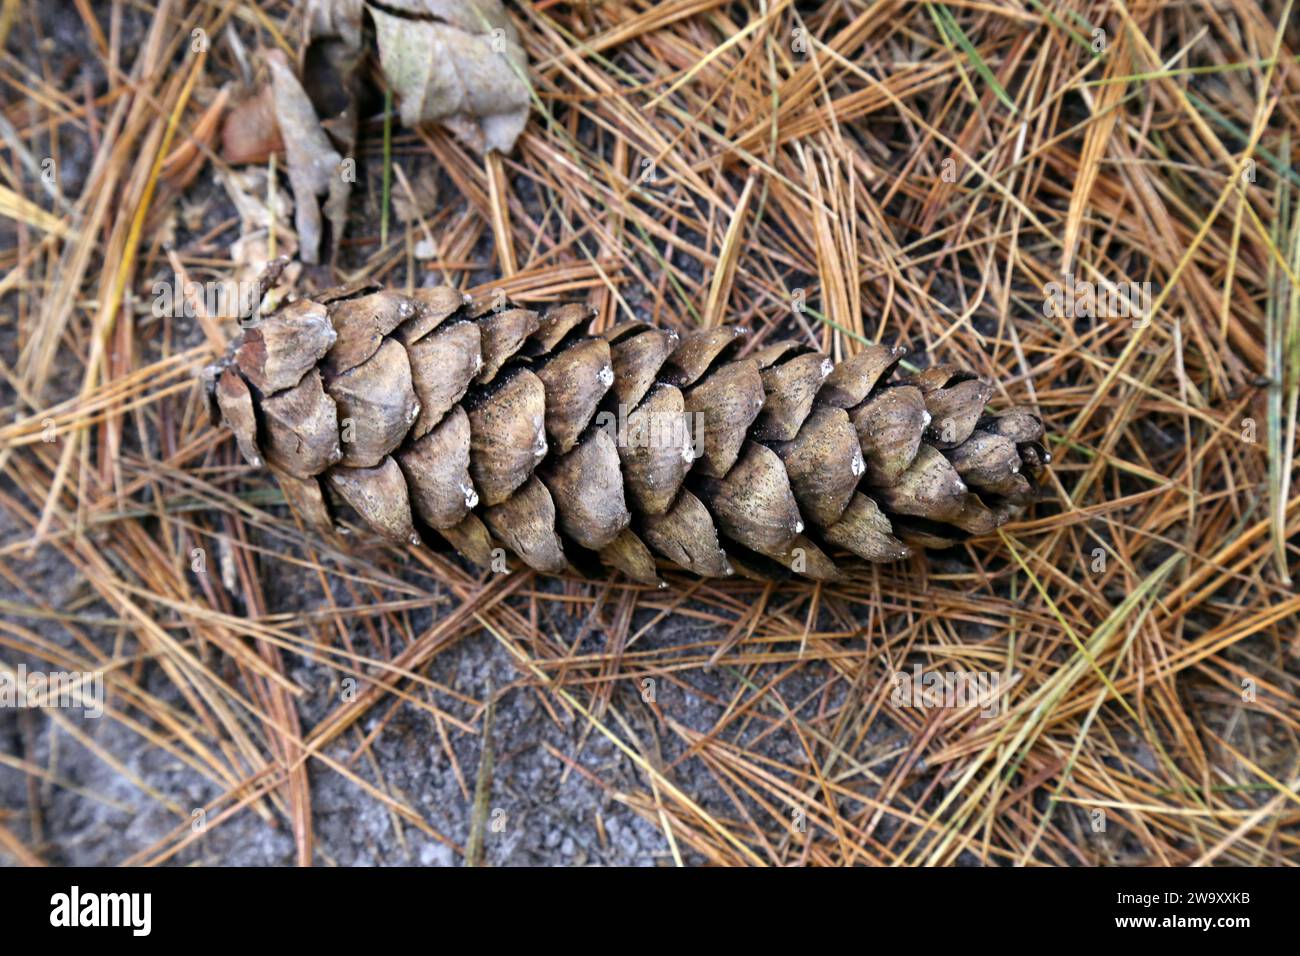 Pinus peuce, Macedonian Pine, Pinaceae. A wild plant shot in the fall. Stock Photo